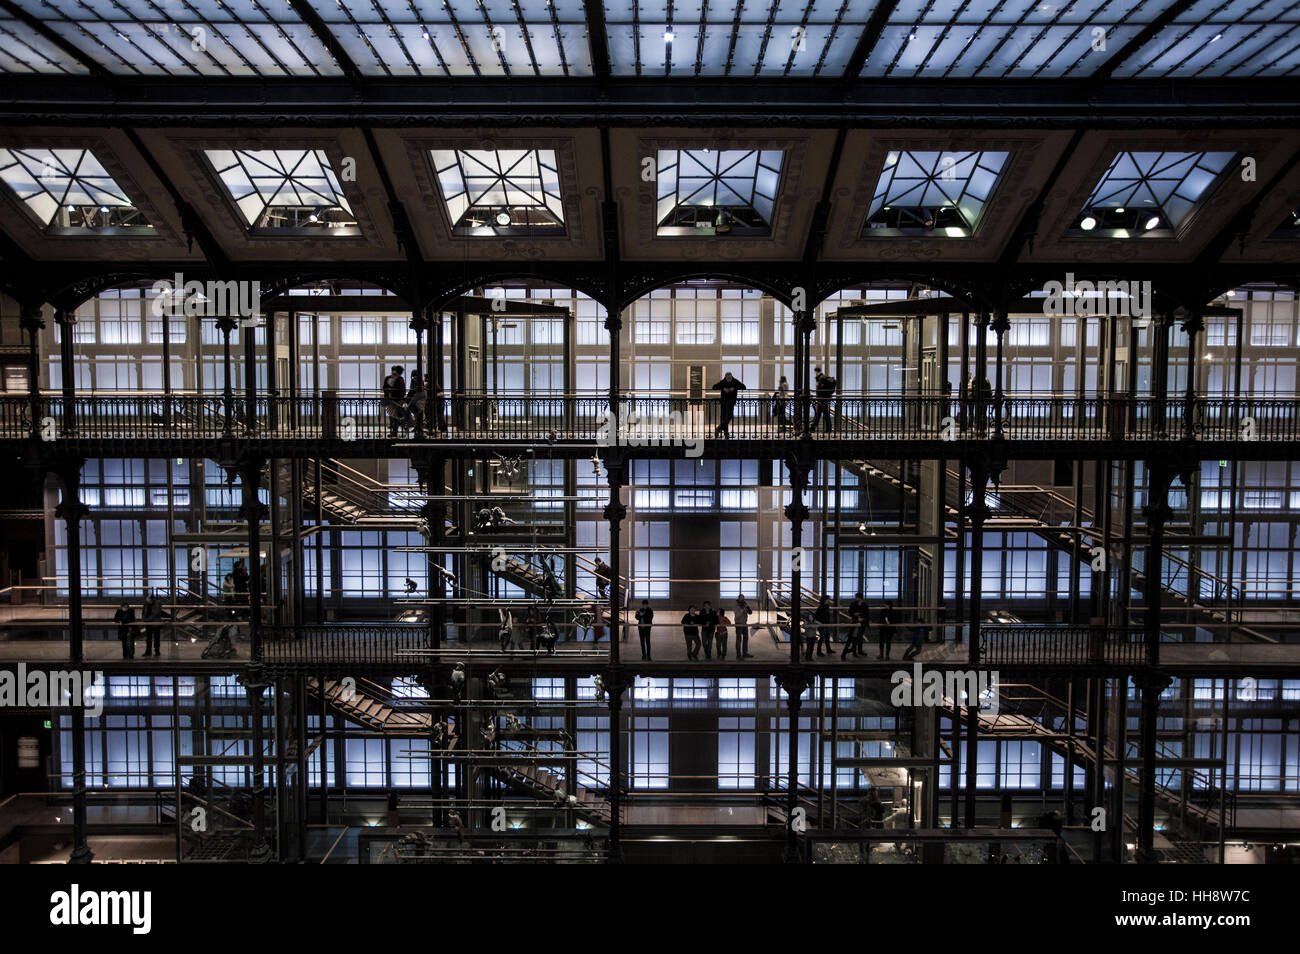 National Museum of Natural History, Interieur, Paris, Frankreich Stockfoto